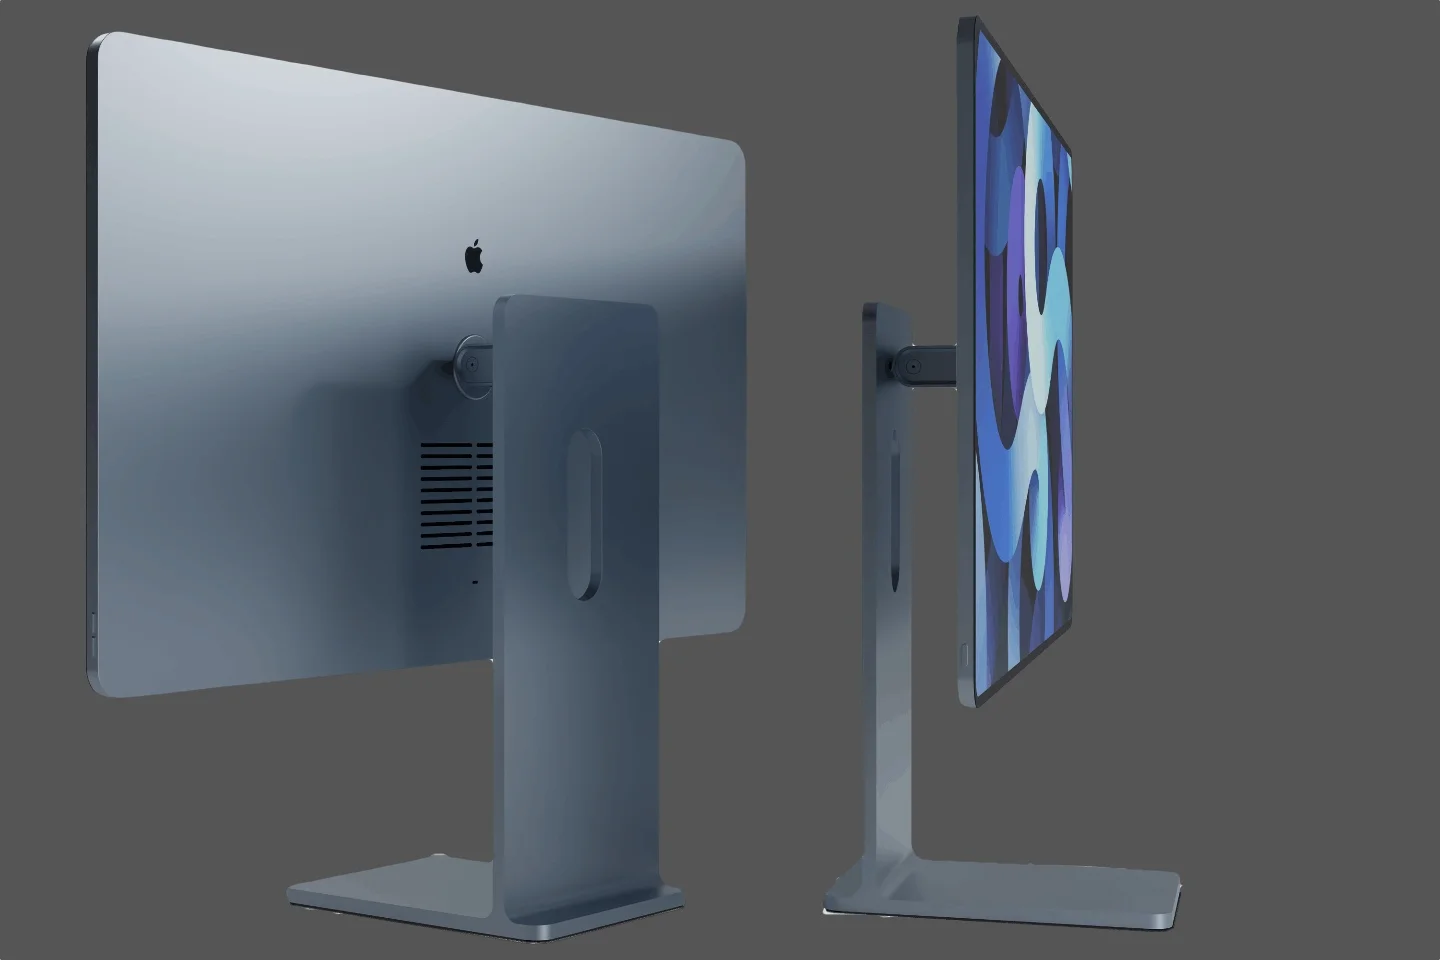 iMac Concept inspired by iPad and Pro Display XDR